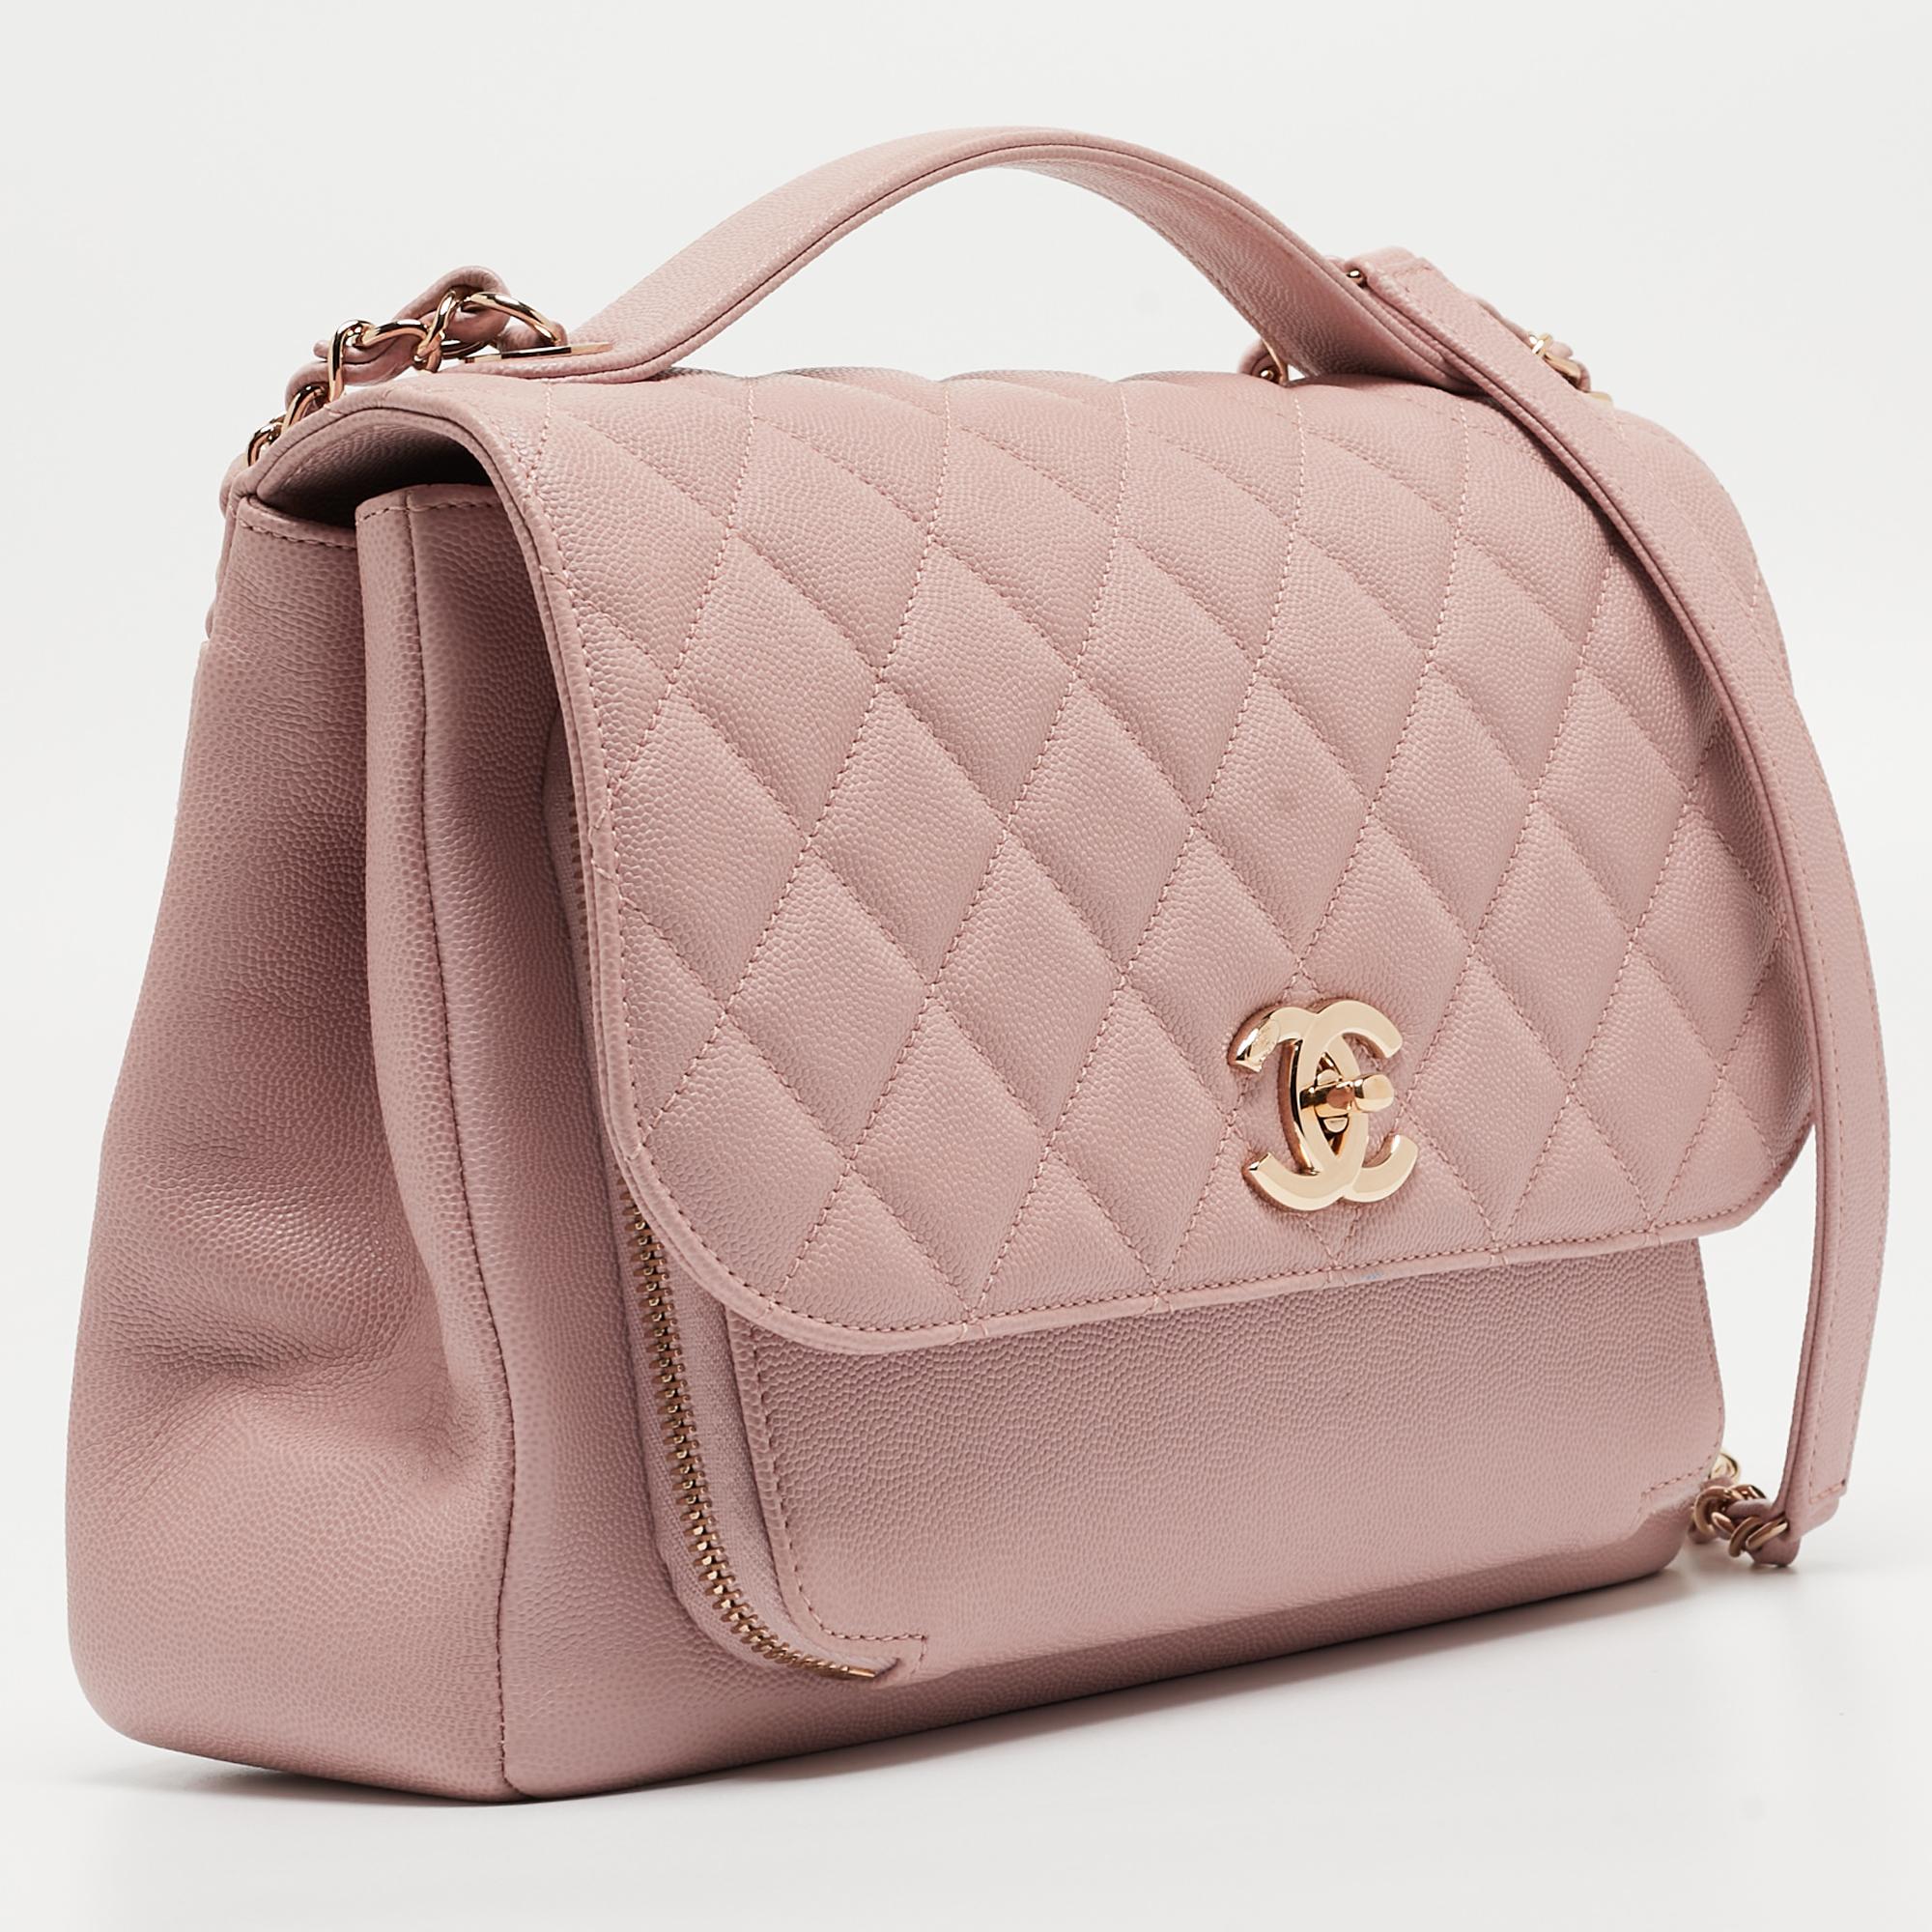 Light up your outfit with this glamorous Business Affinity bag from Chanel that was part of the Spring/Summer 2018 collection. The bag is crafted from Caviar leather and features the iconic quilted pattern. The front flap secures a zip pocket and